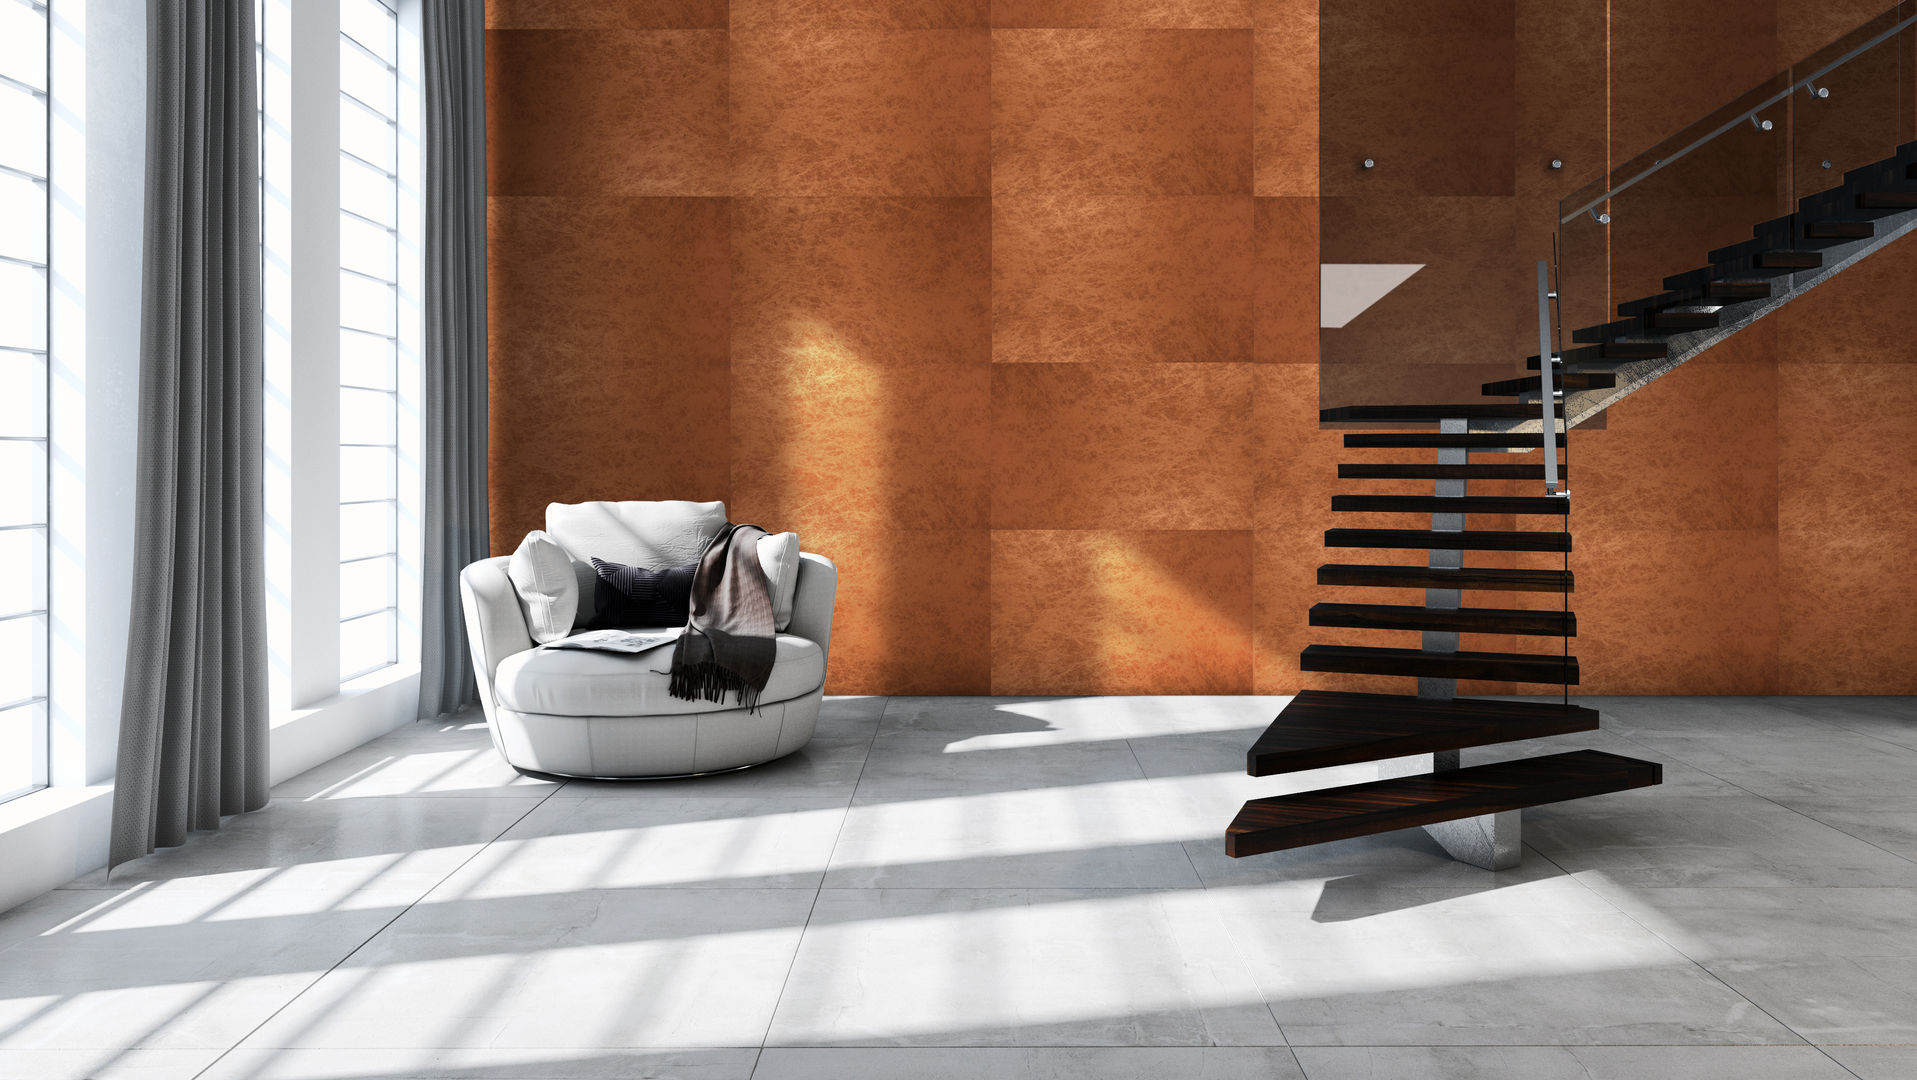 Metalegance Collection, Muratto | Cork Wall Design Muratto | Cork Wall Design Nowoczesny salon